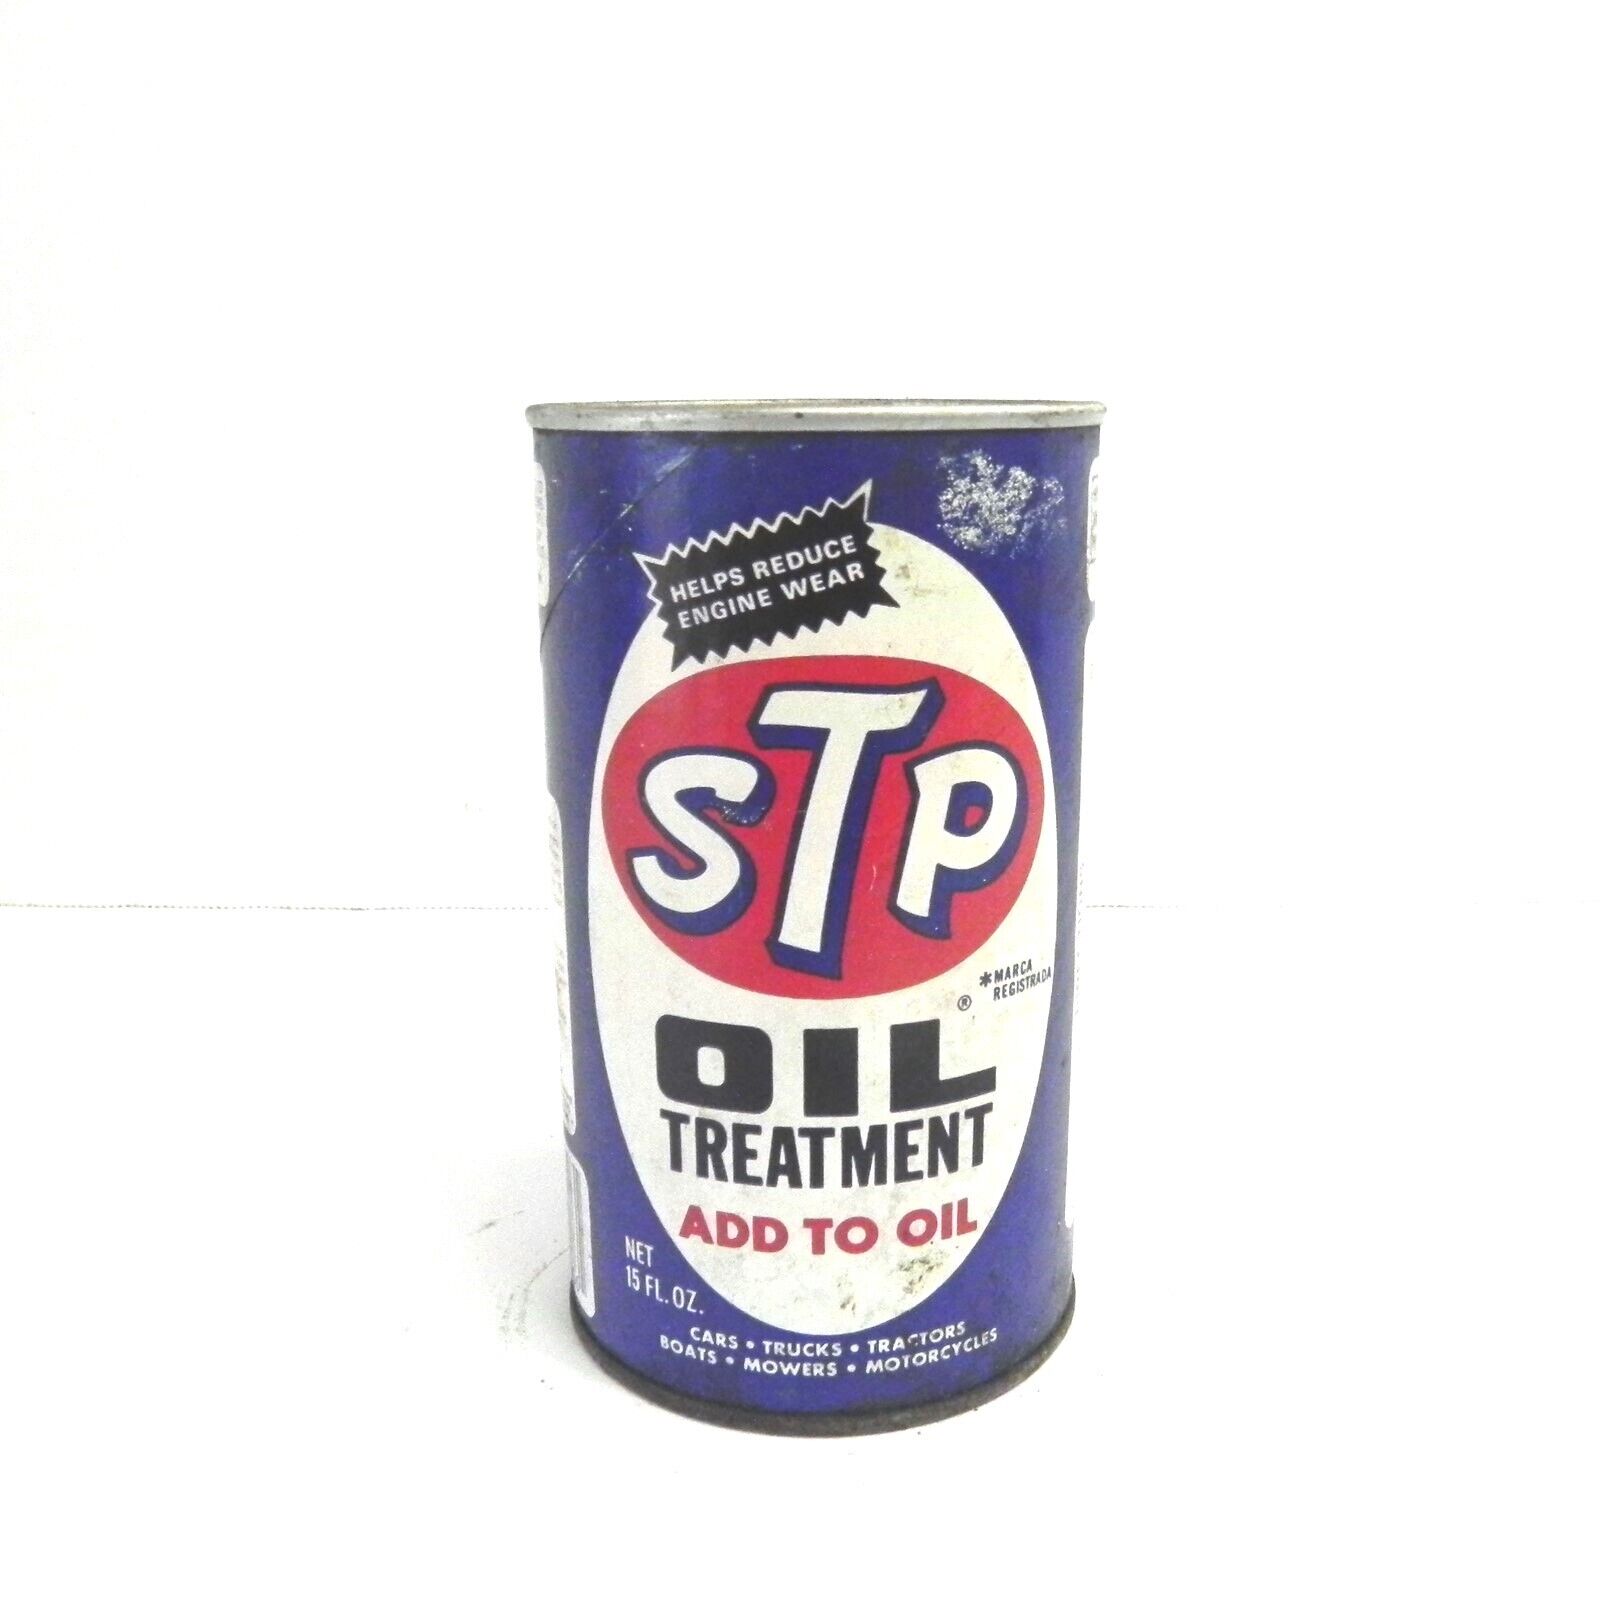 VINTAGE STP OIL TREATMENT 15 FL OZ CAN FULL PRE OWNED COLLECTABLE OIL CAN VTG 